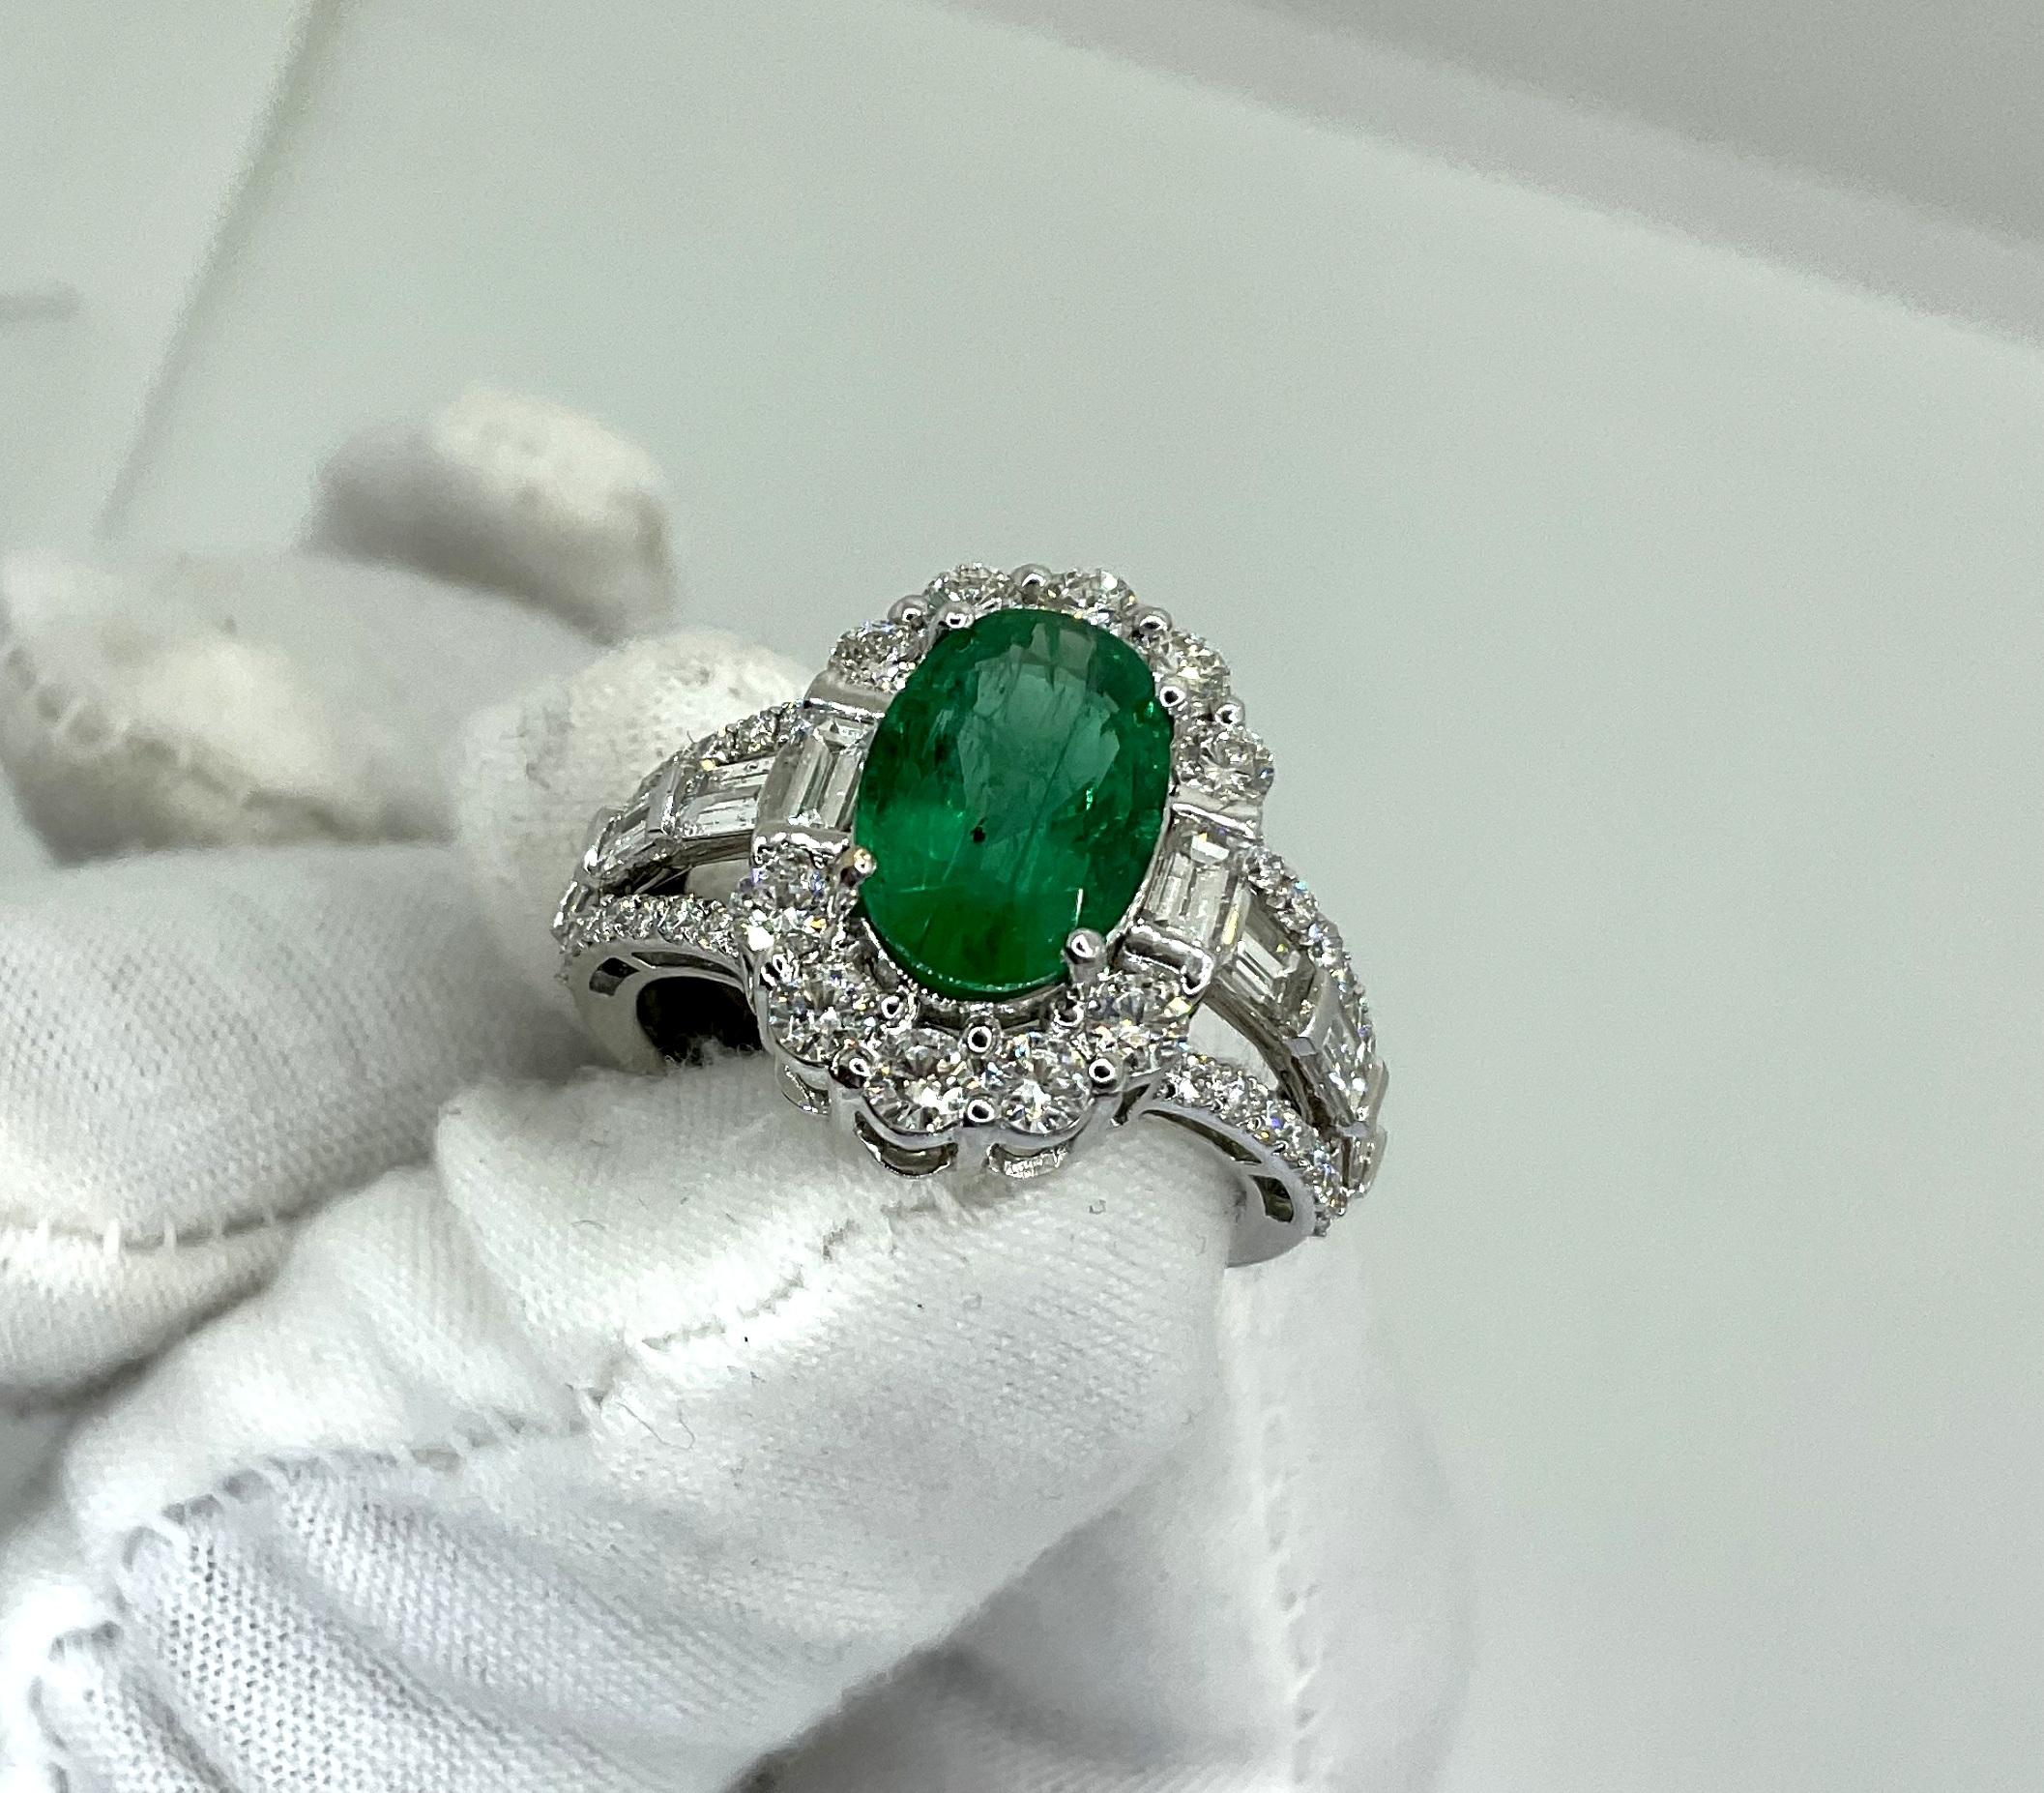 Oval Cut 18k Gold Art Deco Zambian Emerald Cocktail Ring 2.05 cts with 1.49 ct Diamonds  For Sale